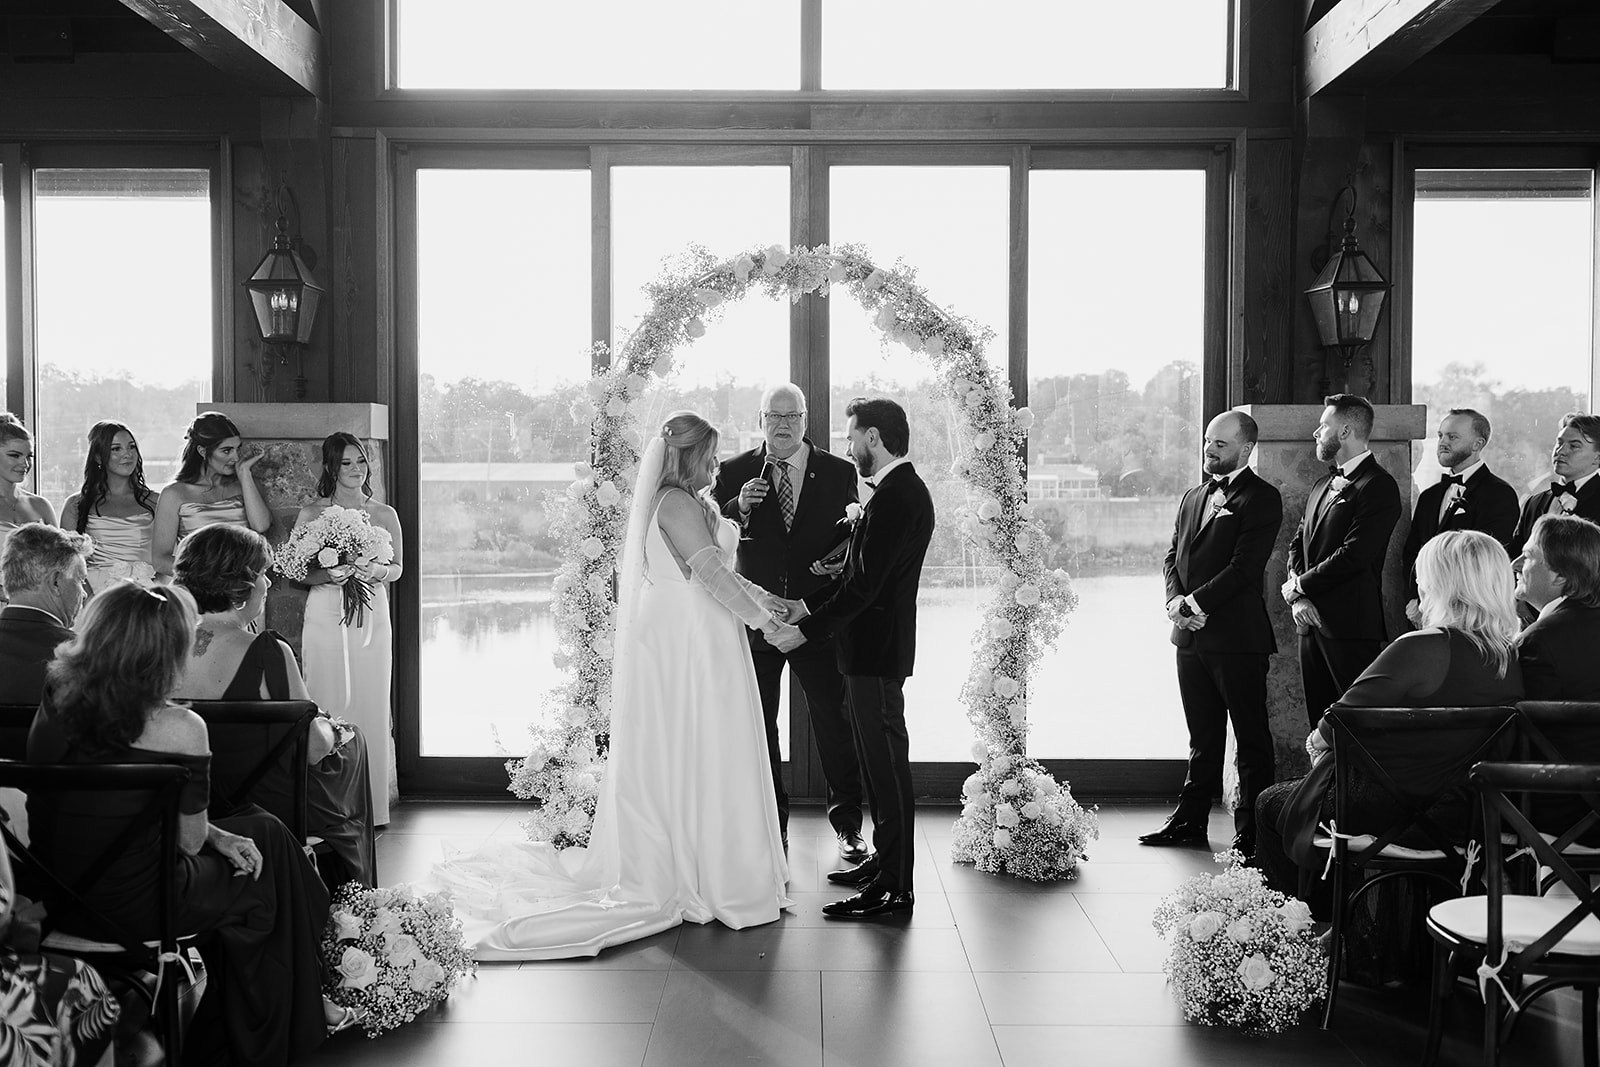 Corie and Brandon exchanging vows by the riverside at Cambridge Mill during their enchanting fall wedding ceremony